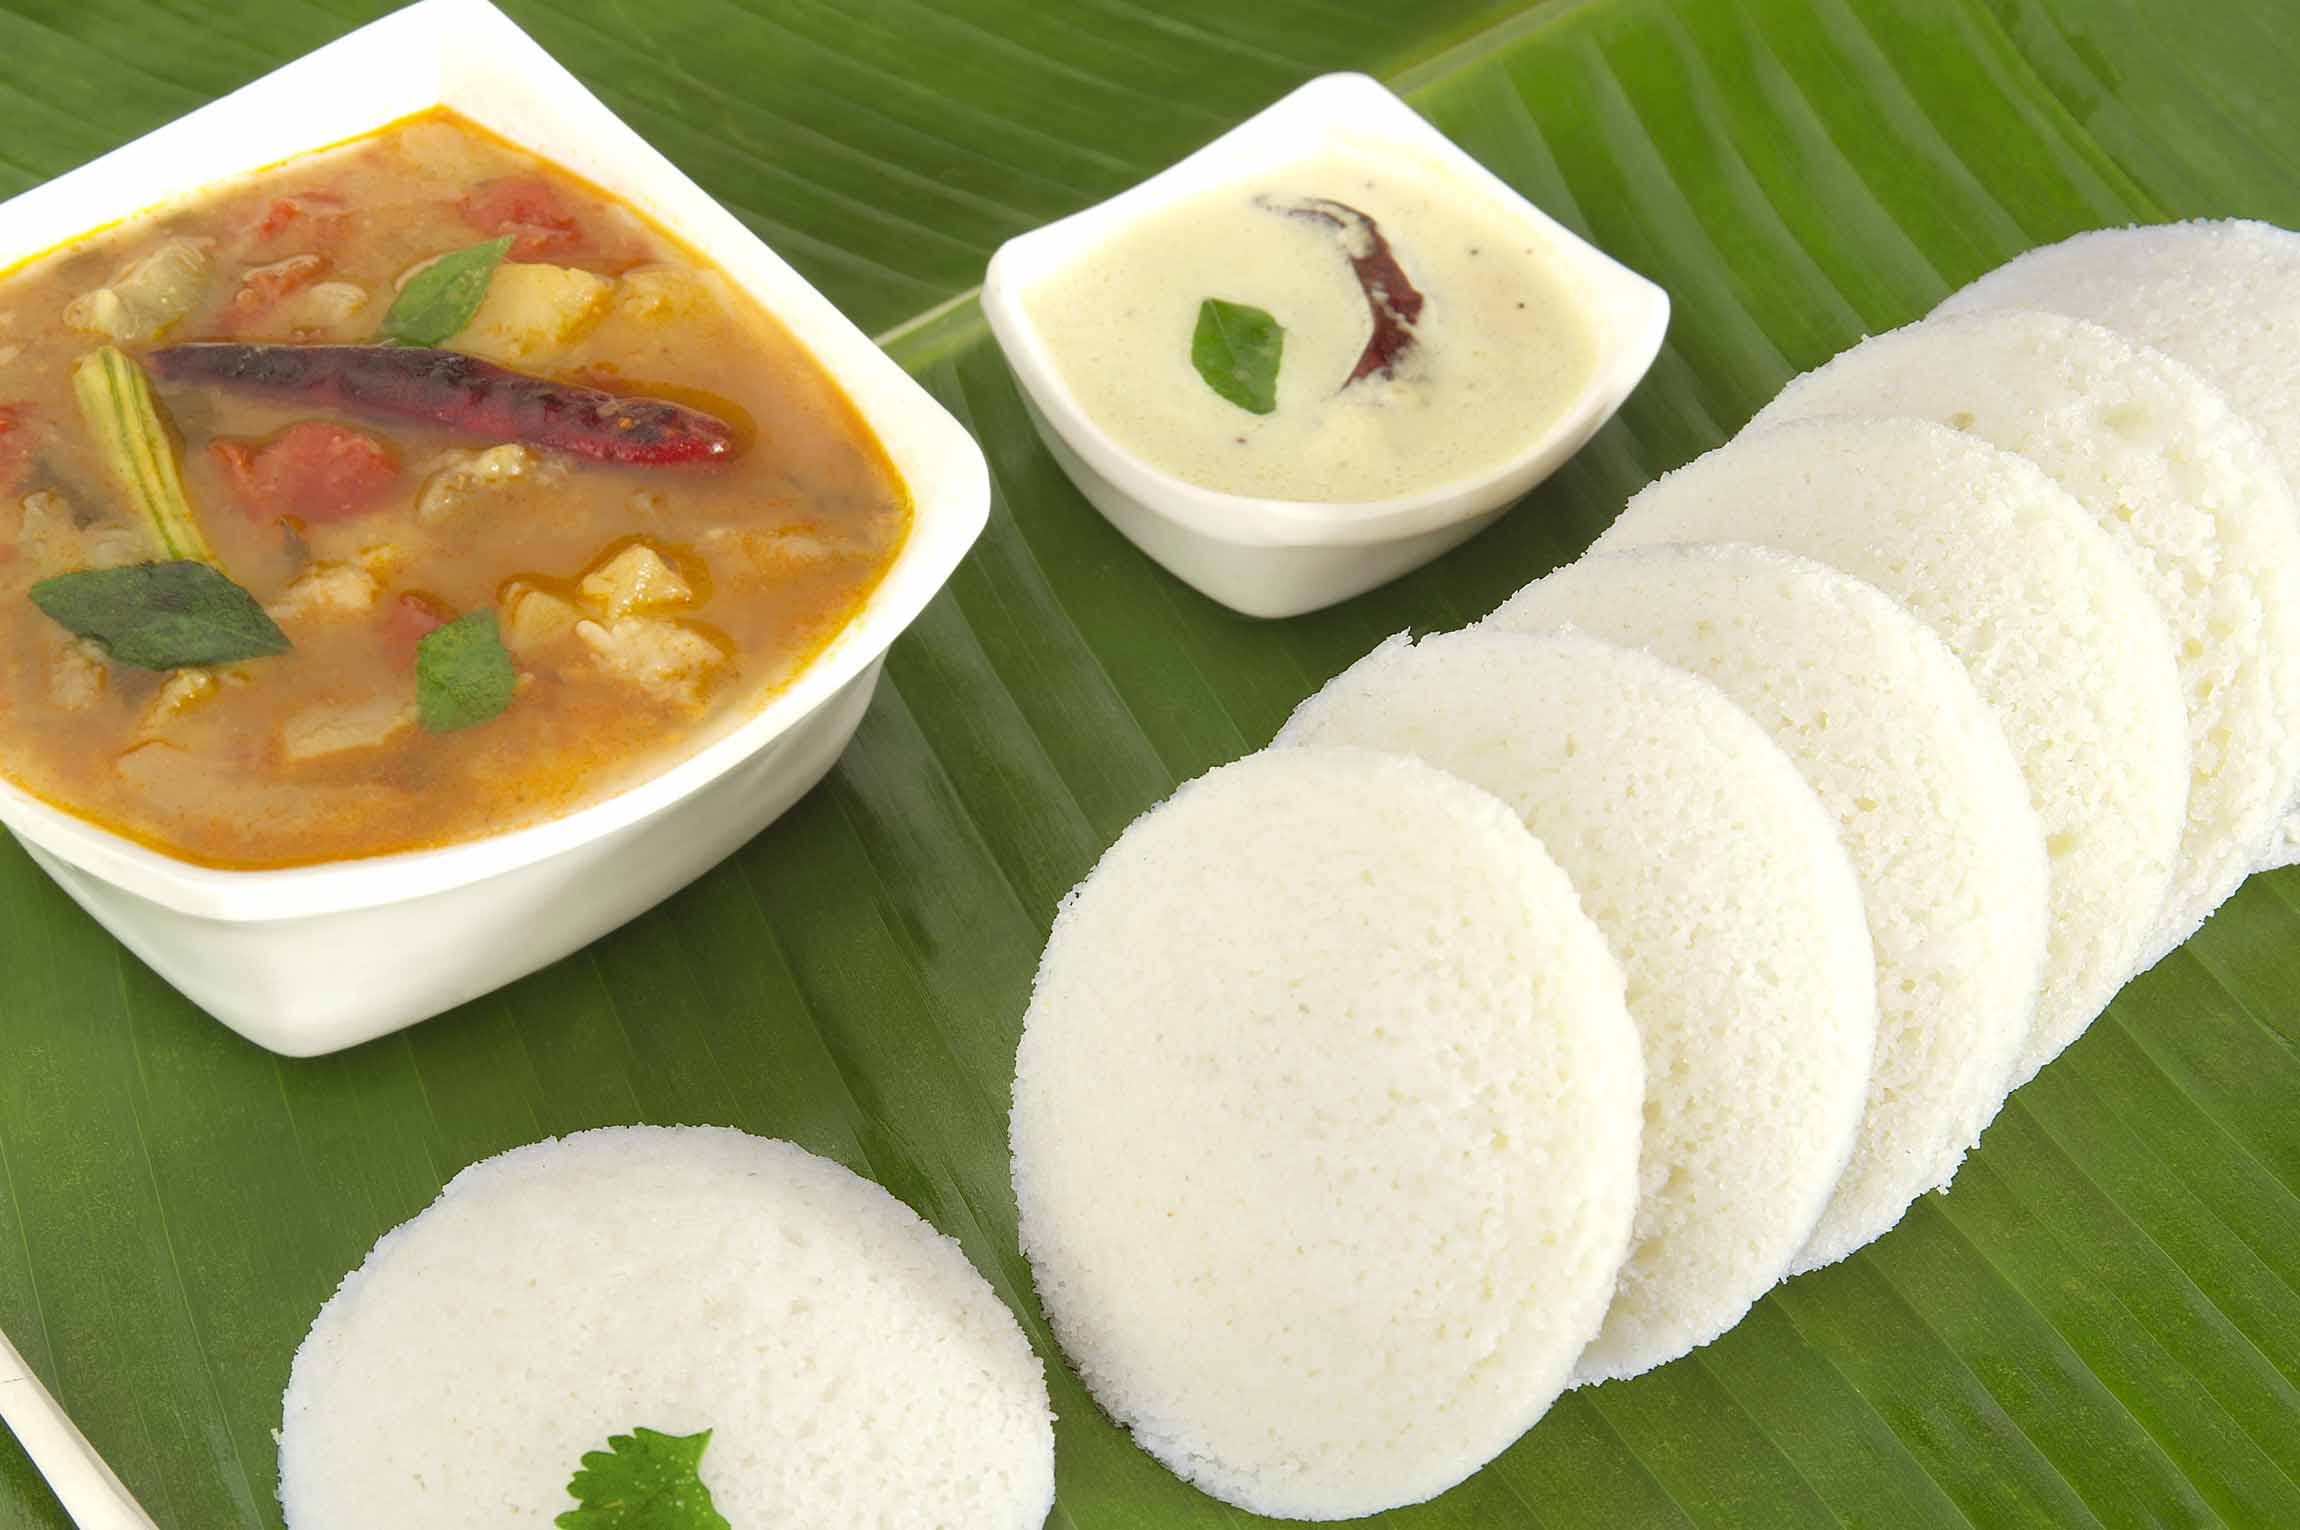 Top 5 South Indian Dishes for Hungry Travelers - South Indian Cuisine